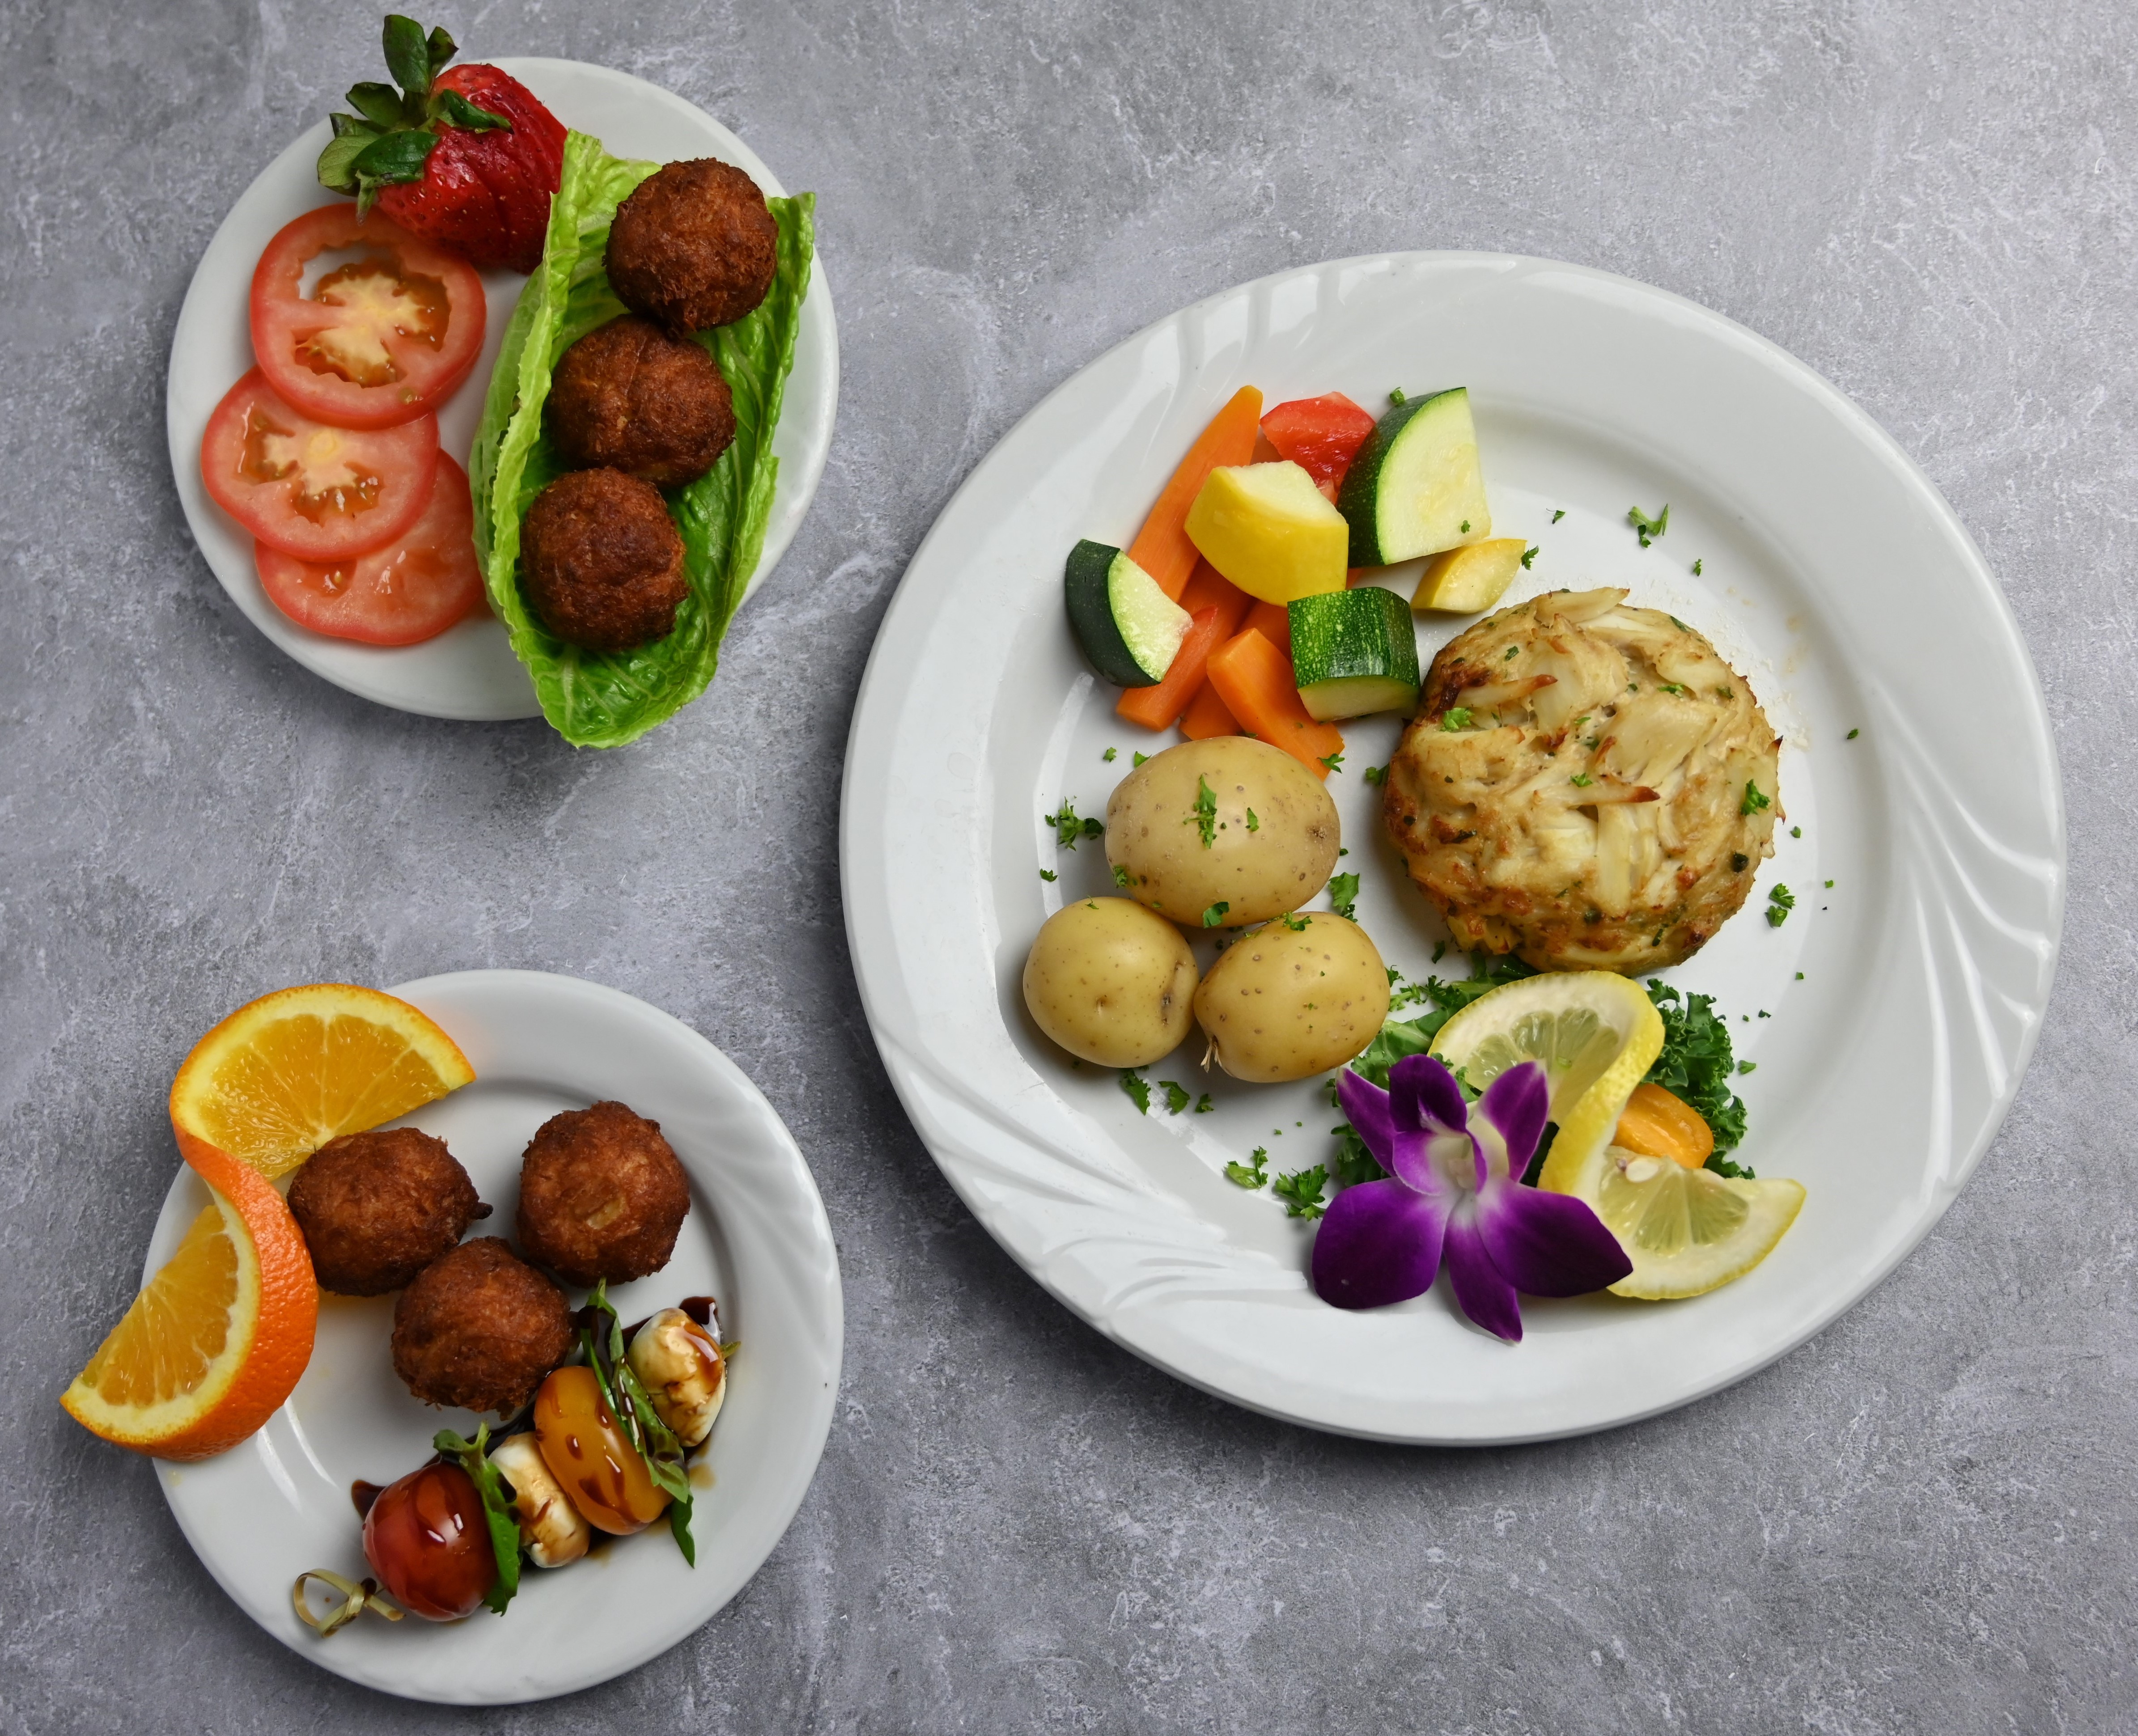 Crabcakes and crab balls on three plates